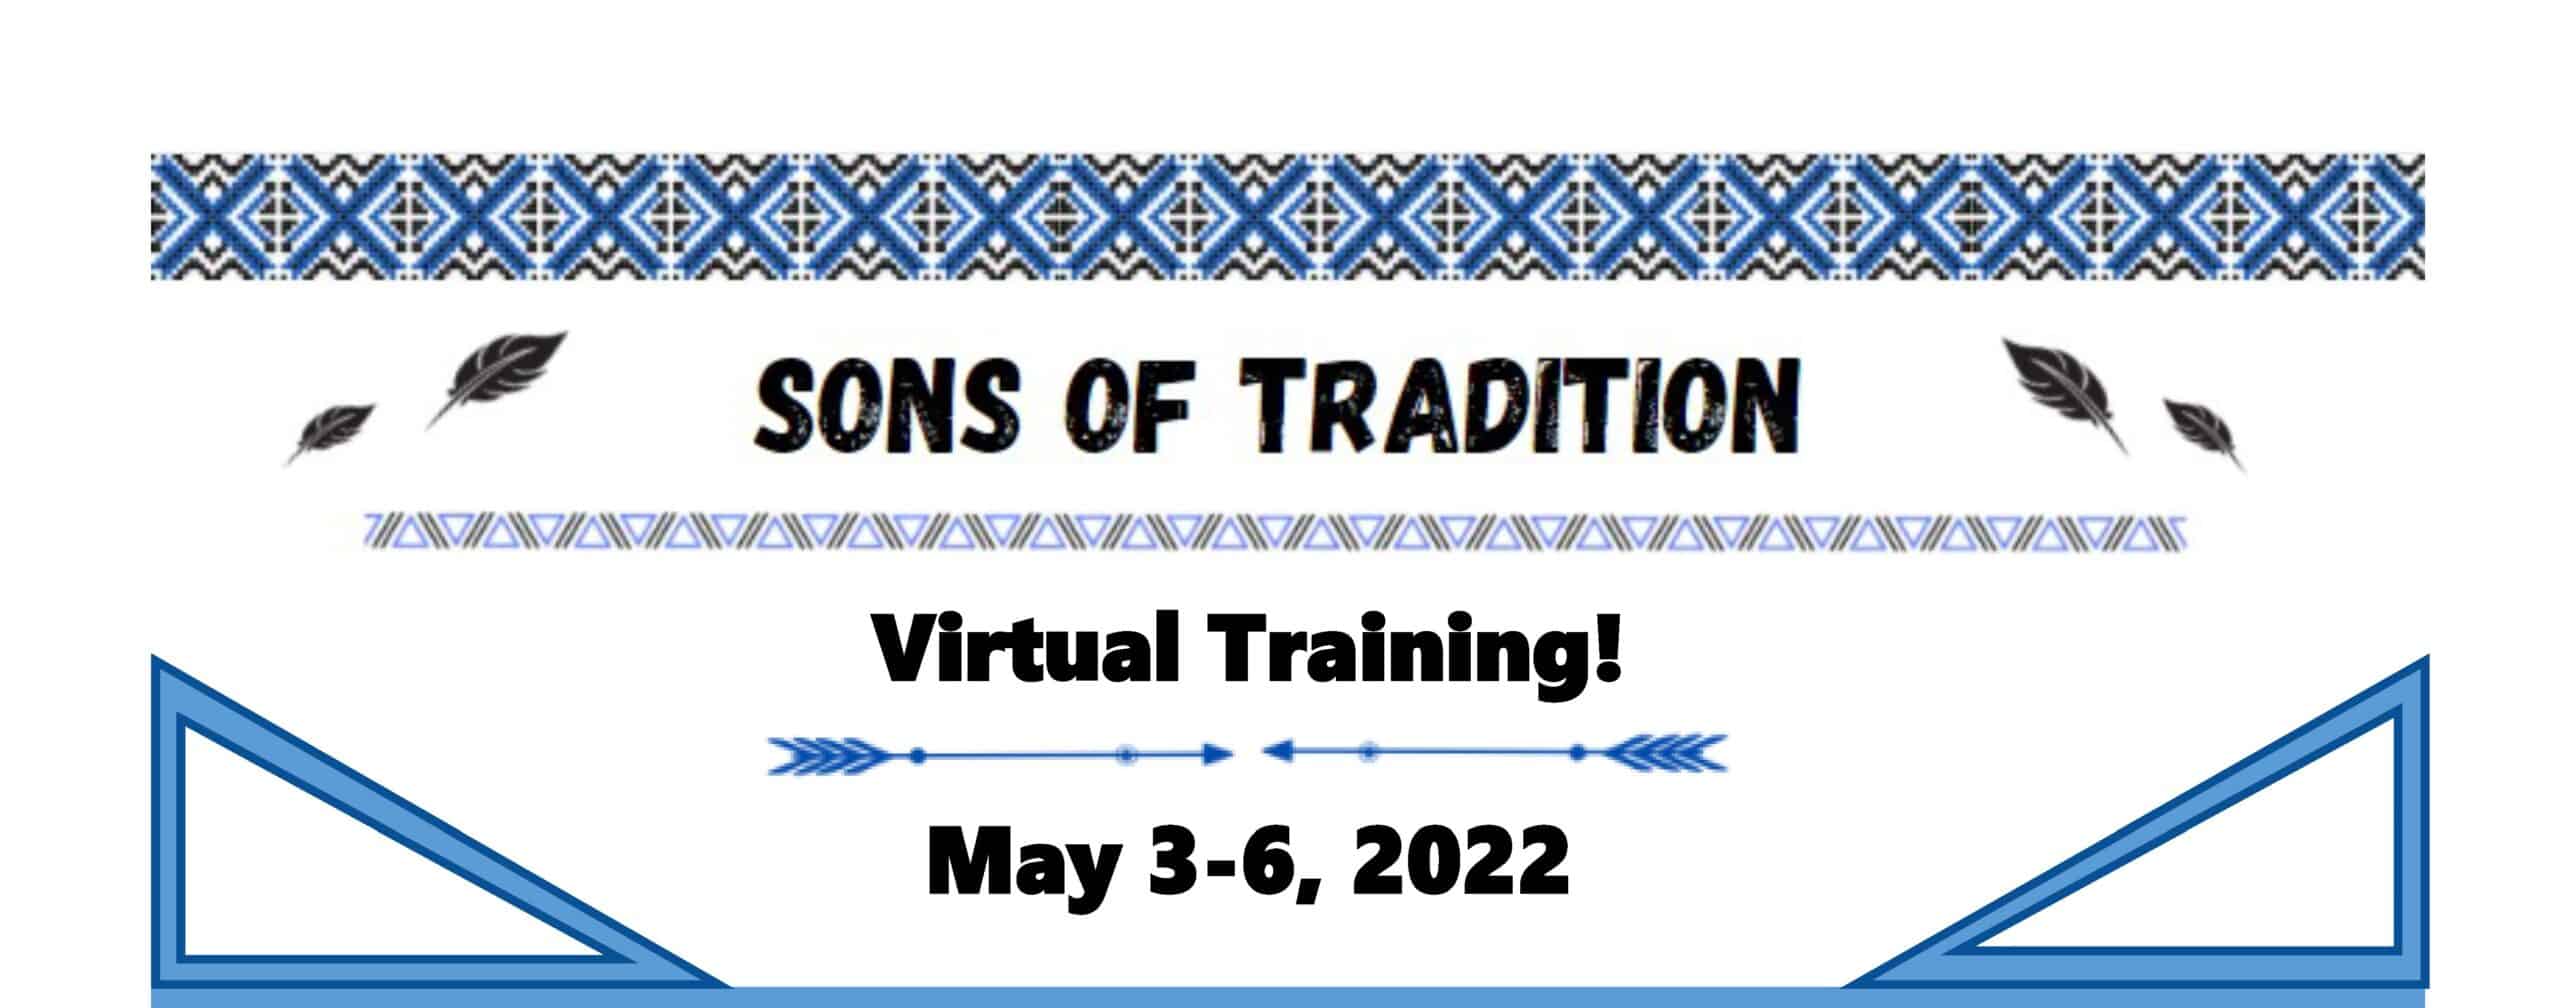 Sons of Tradition (July 19-22, 2022) – 4 Day Virtual Zoom Training